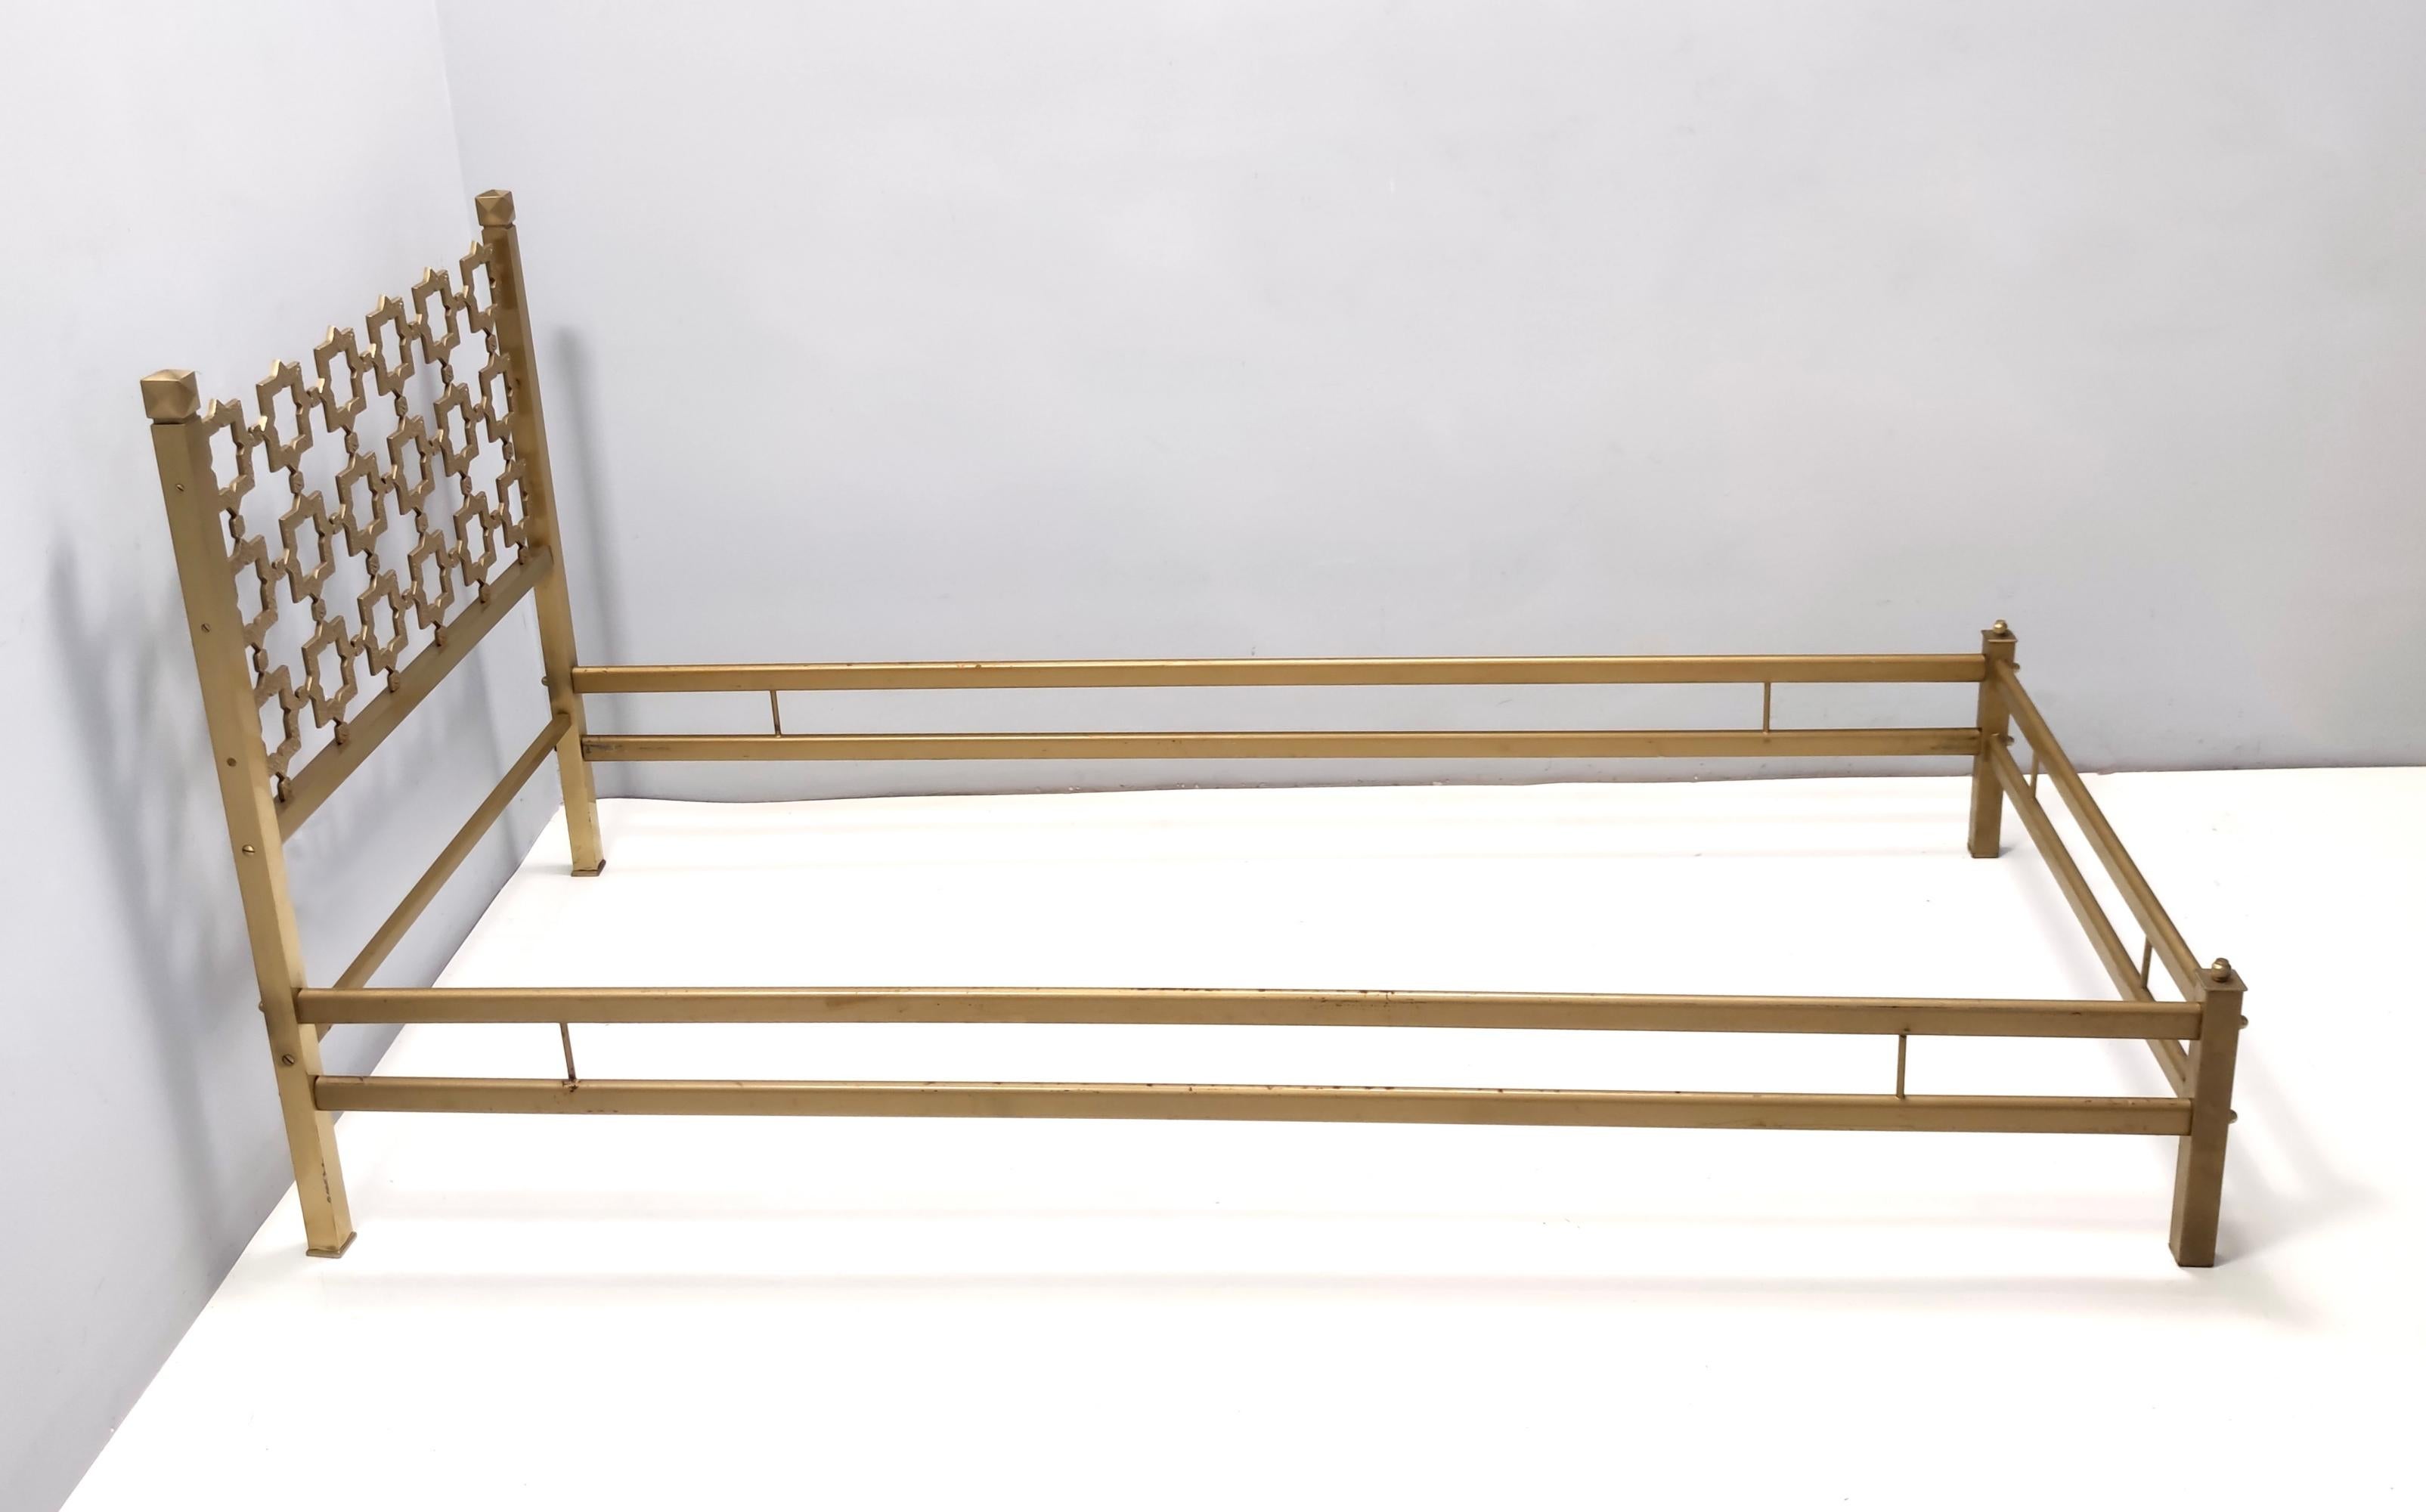 Made in Italy, 1970s - 1980s.
This is a beautiful sculptural single bed in a classical style by Luciano Frigerio.
It features a brass headboard with a an artistic handmade cast brass star-pattern.
The lateral parts and the footboard is in